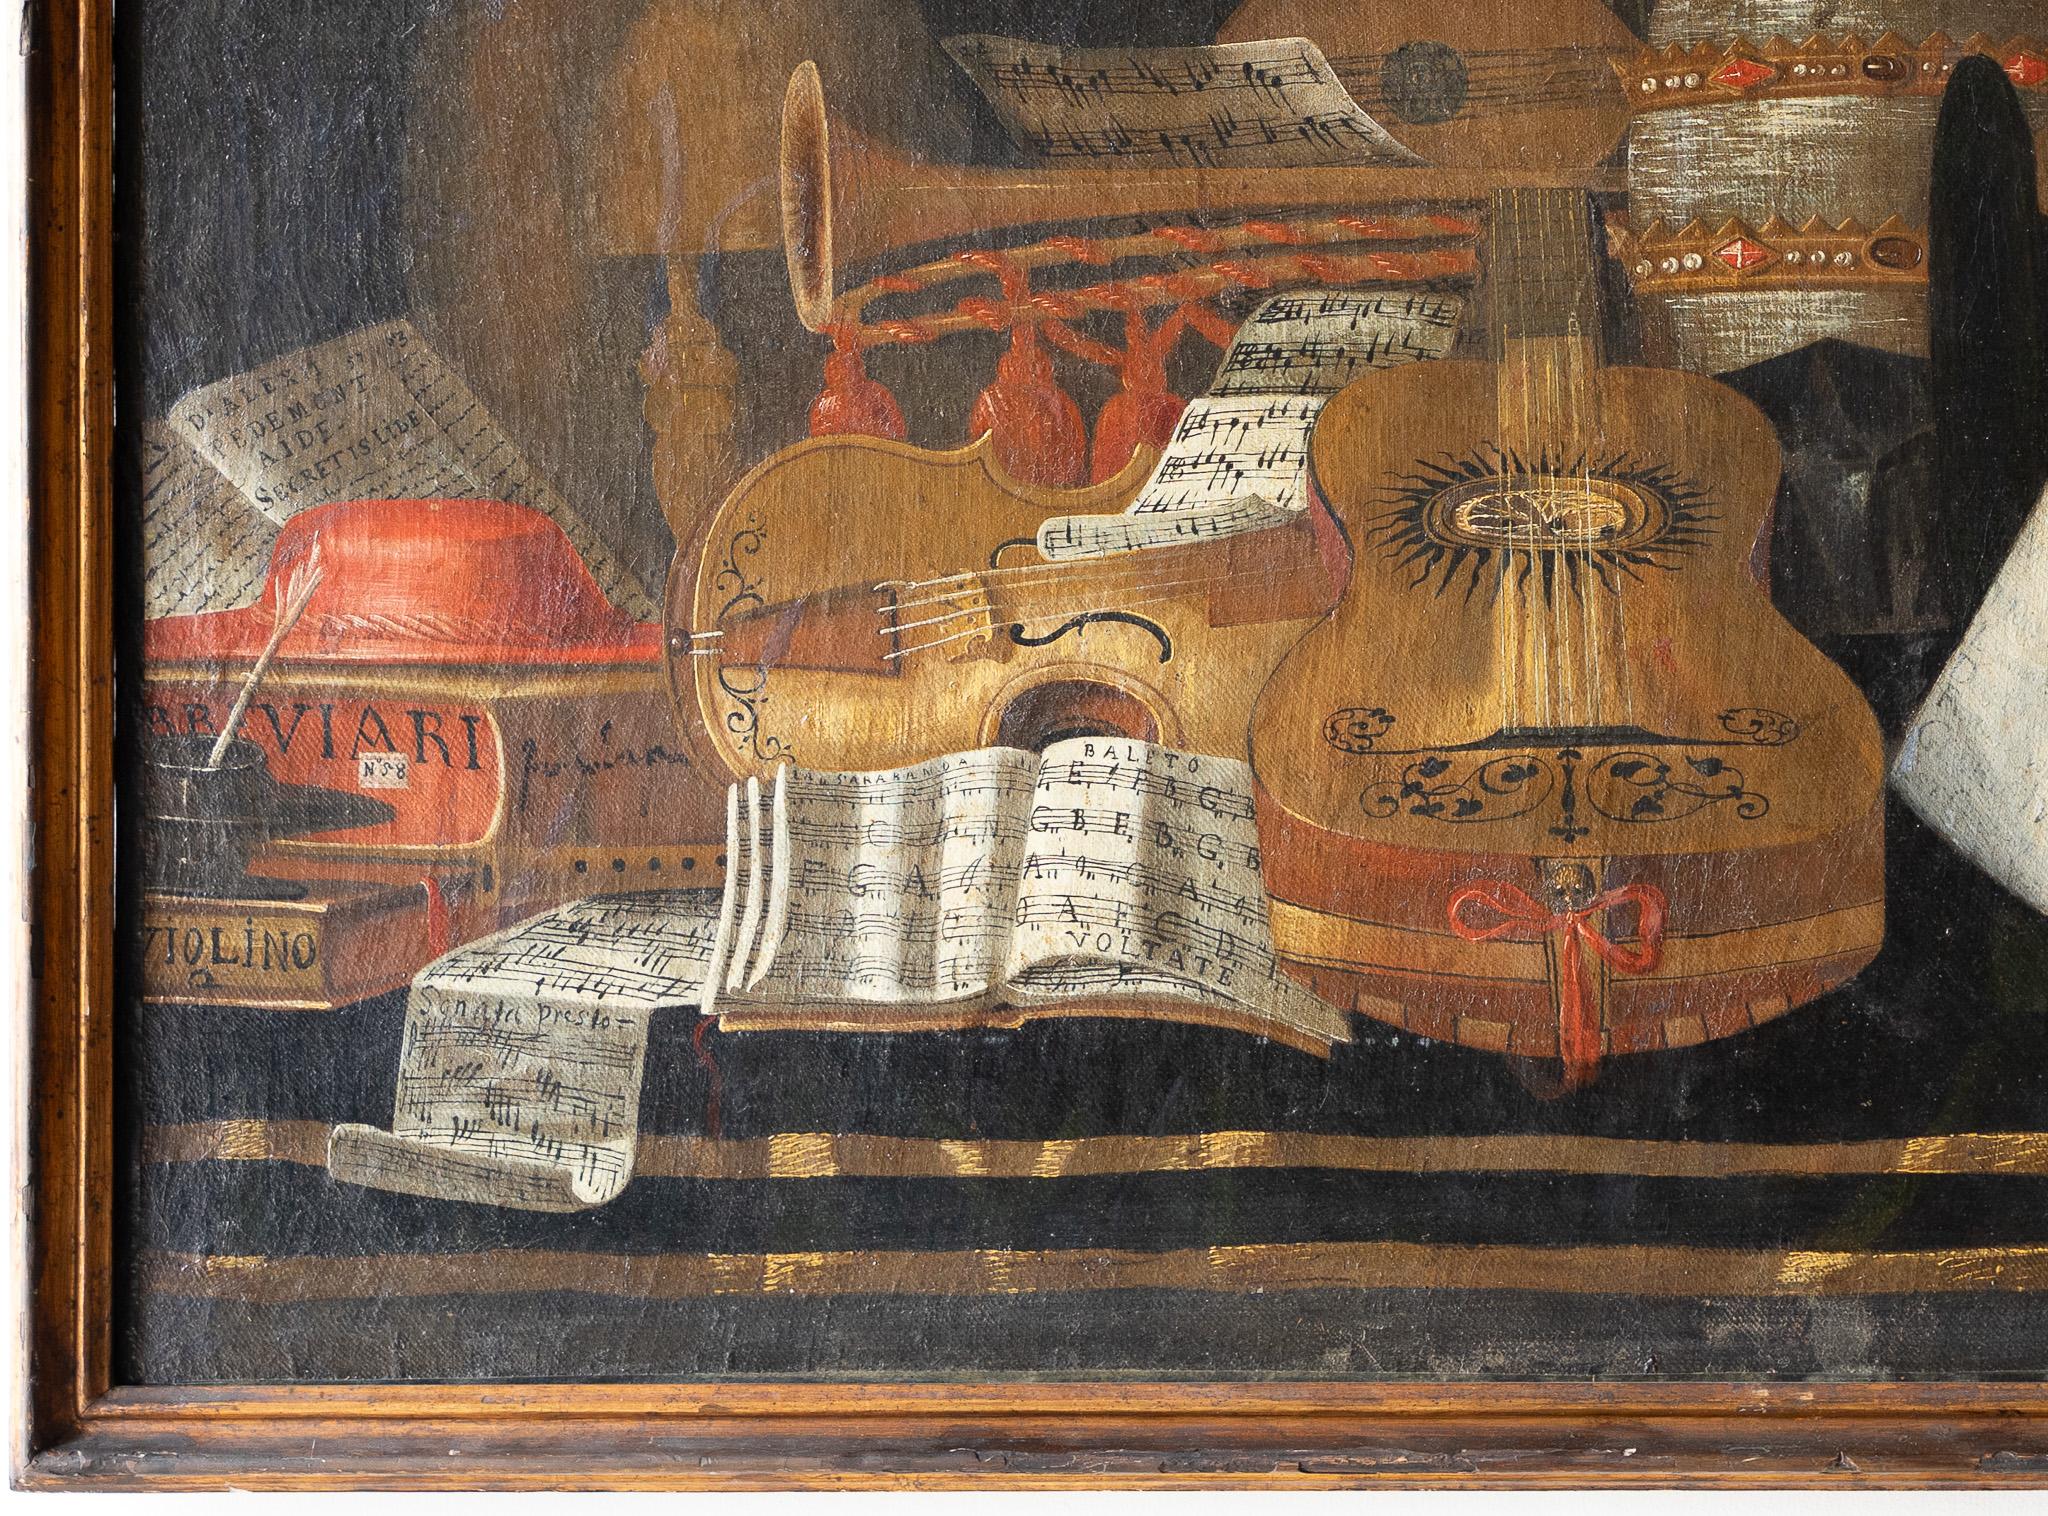 Still Life with Musical Instruments
Epoch: late 1600s
Origin: Milan
Size: 138x100 cm with frame, 130x90 cm canvas only.
Description: Magnificent still life with musical instruments dating from the late 17th century. With the pictorial genre of still